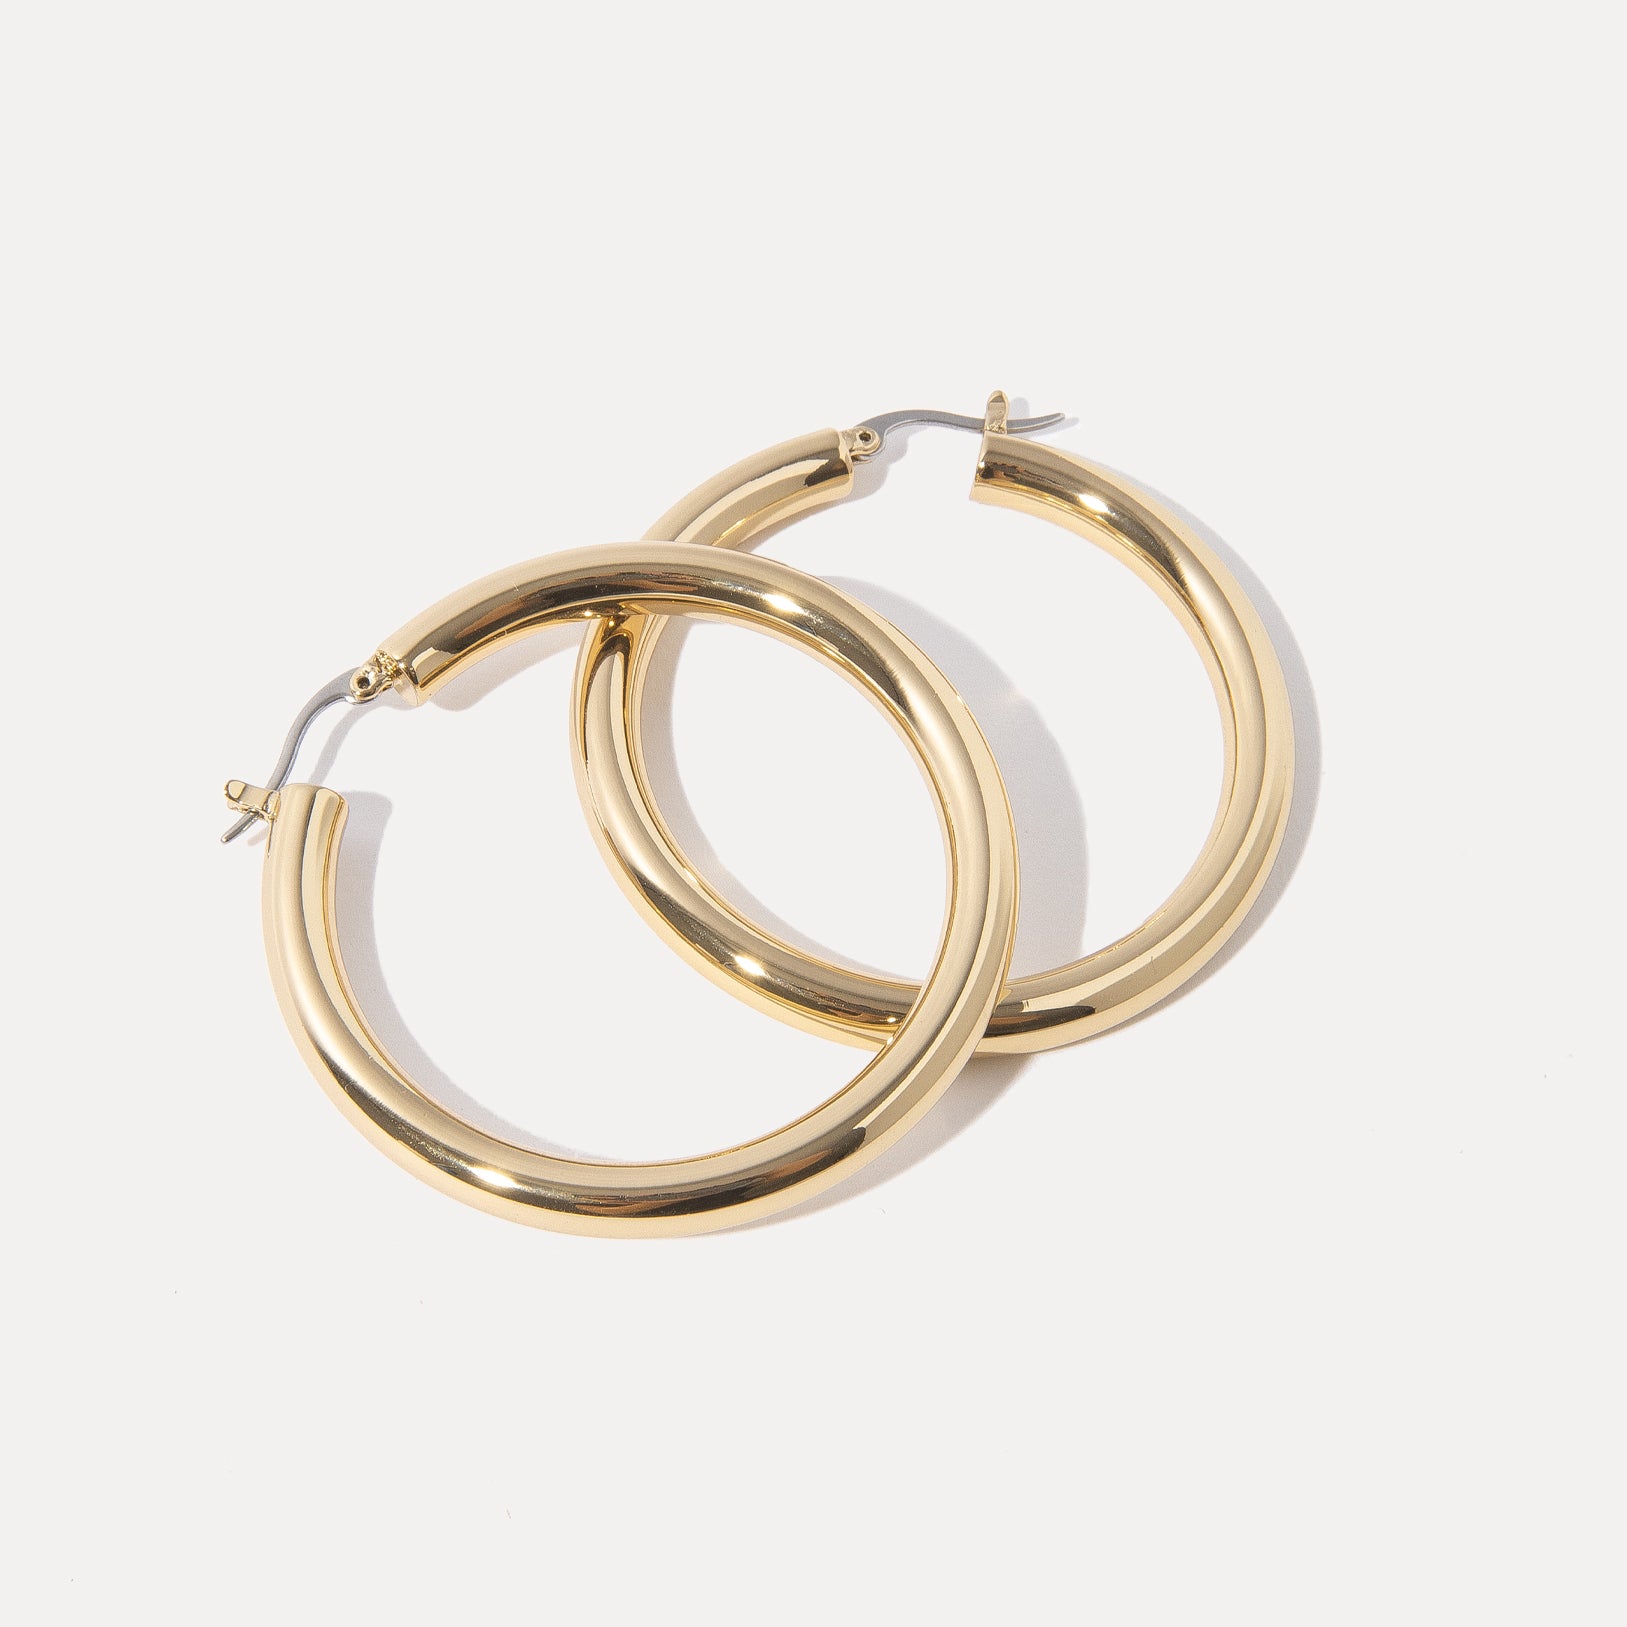 How to Choose the Perfect Gold and Silver Jewelry to Match Your Style